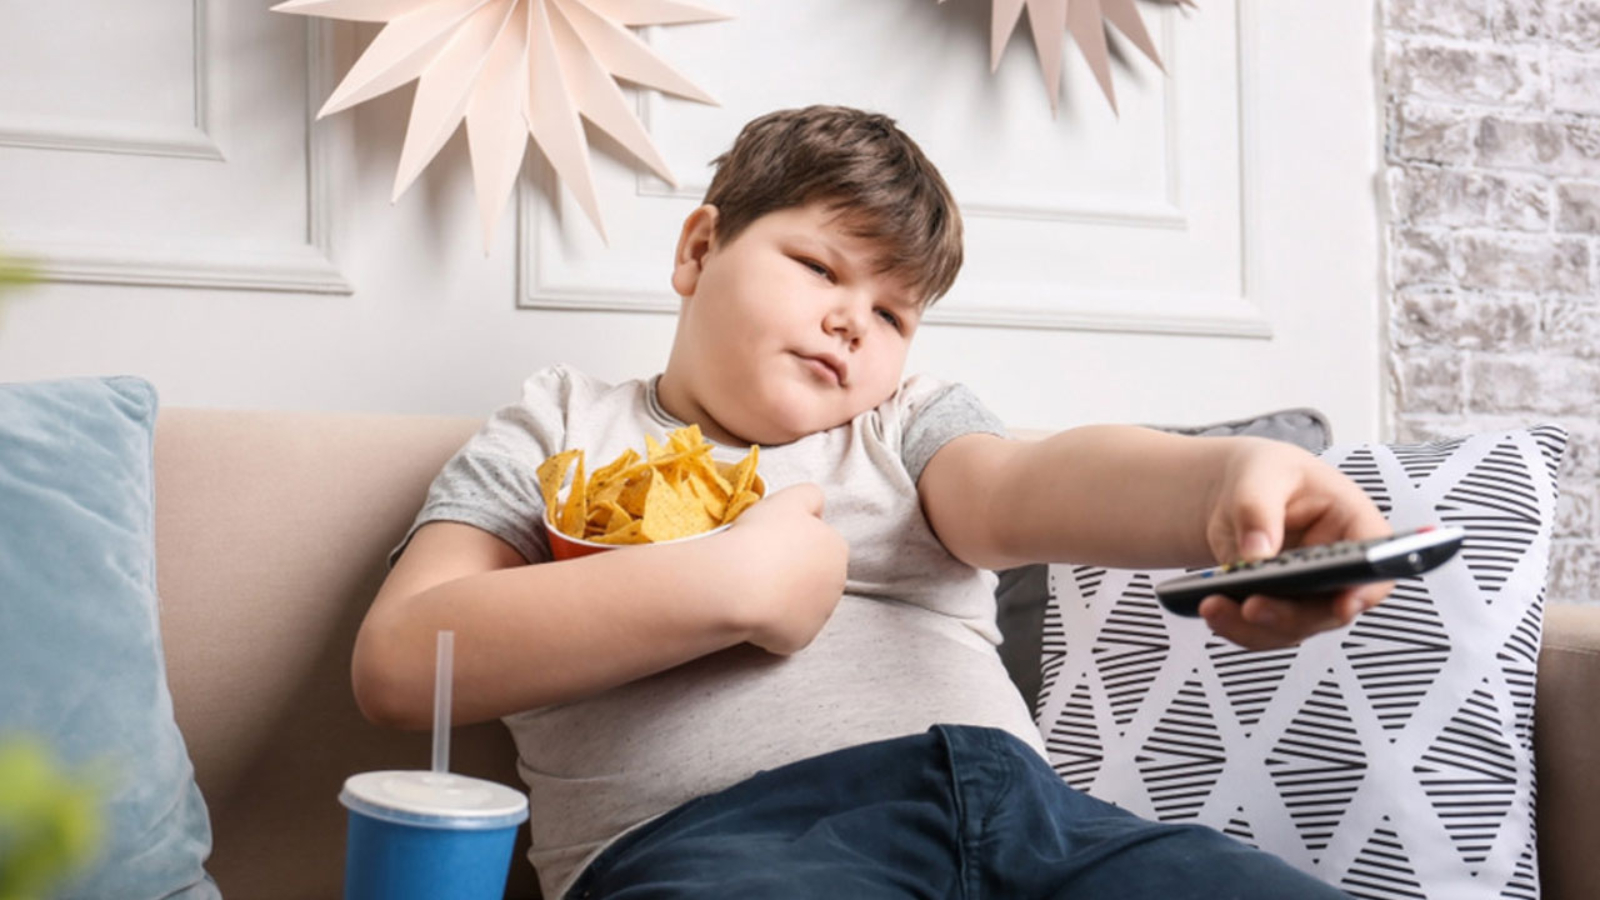 how-to-help-an-overweight-child-10-dos-and-donts-for-concerned-moms-and-dads